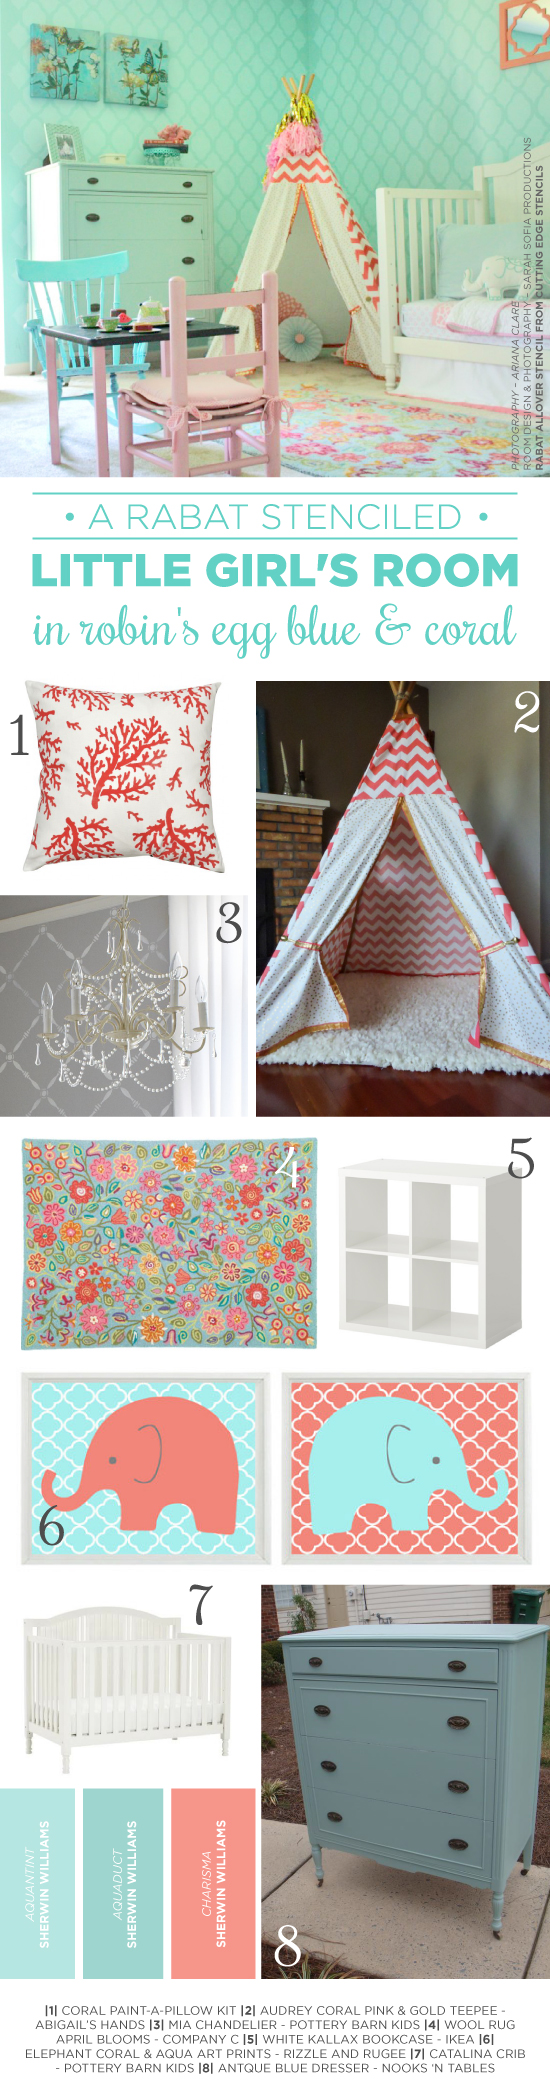 Cutting Edge Stencils shares how to recreate the look of this Rabat Allover stenciled girl's bedroom. http://www.cuttingedgestencils.com/moroccan-stencil-pattern-3.html